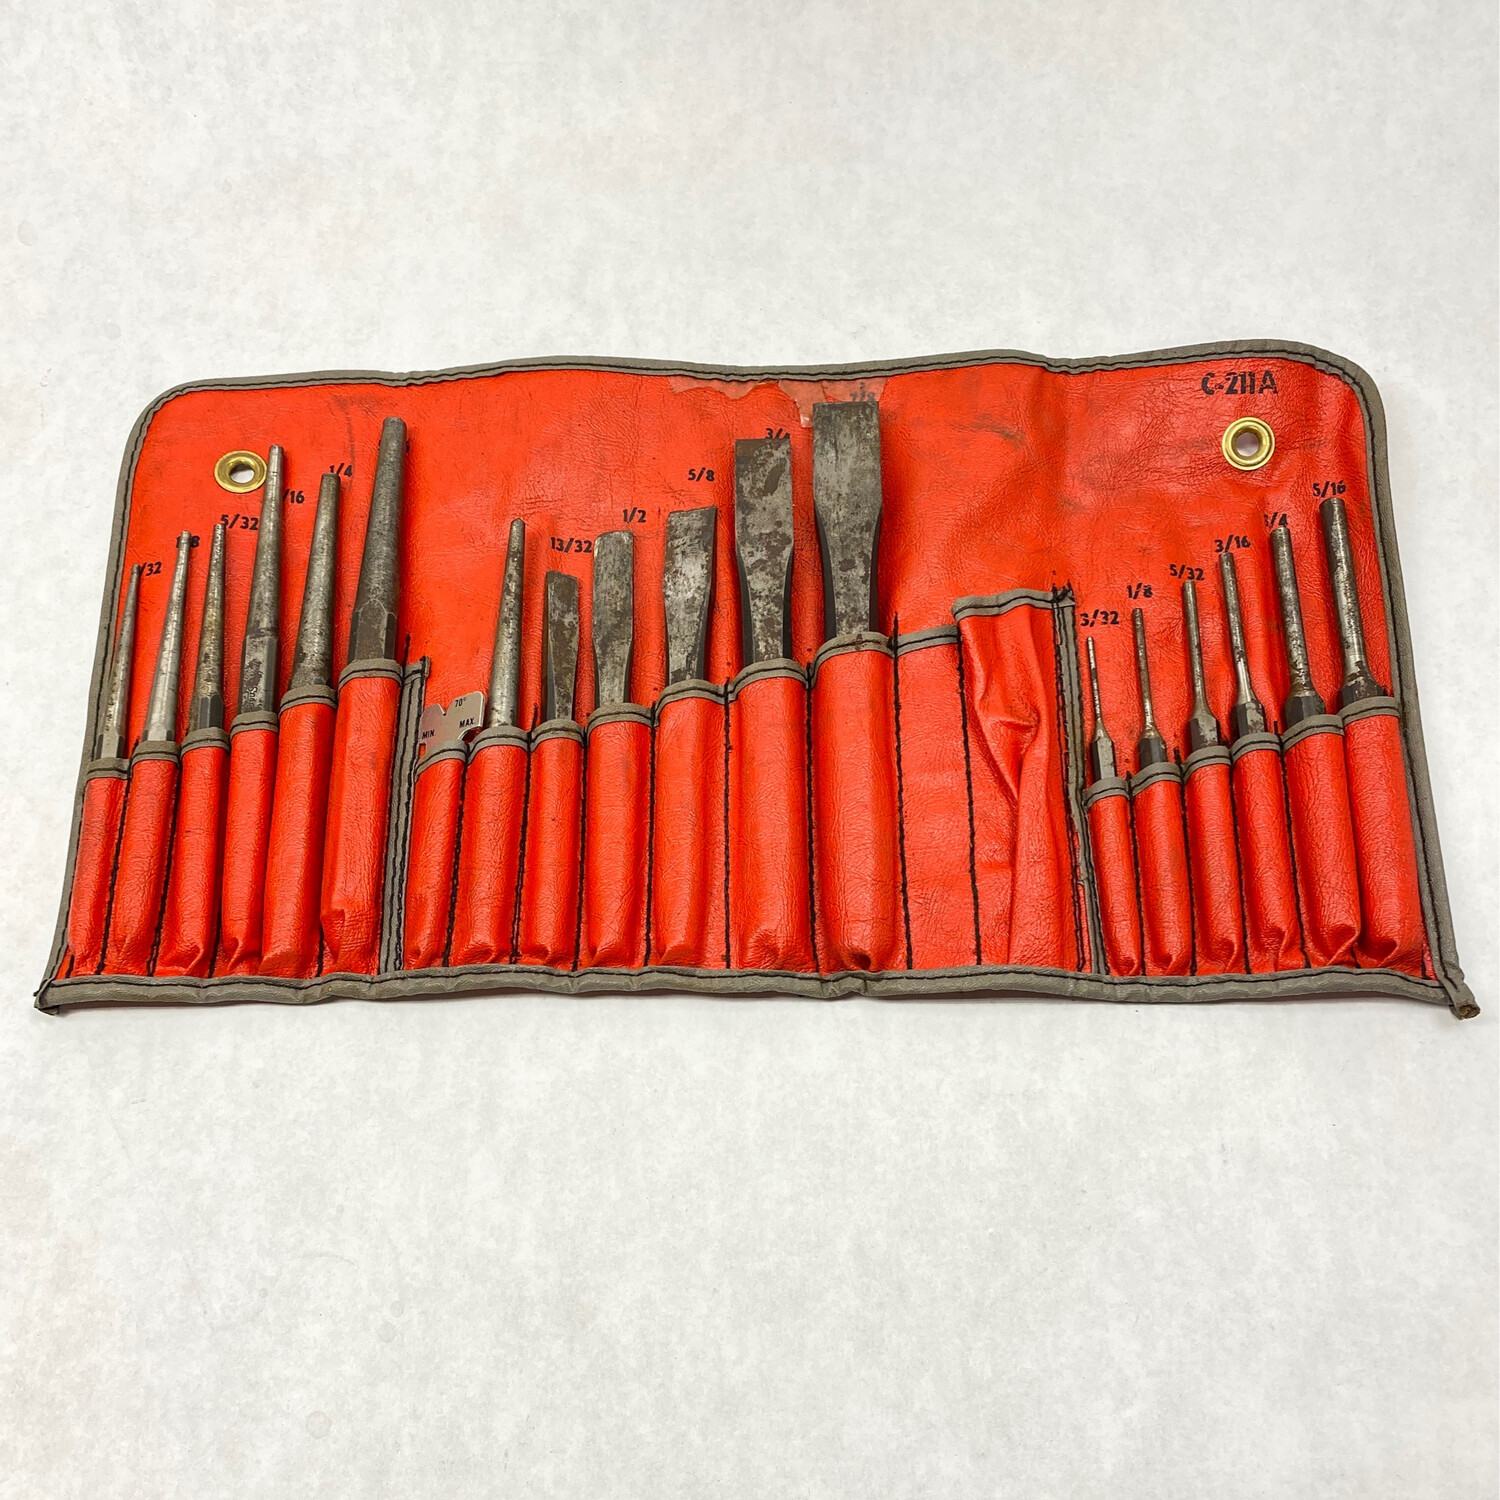 Snap On Punch & Chisel Set, C-211A